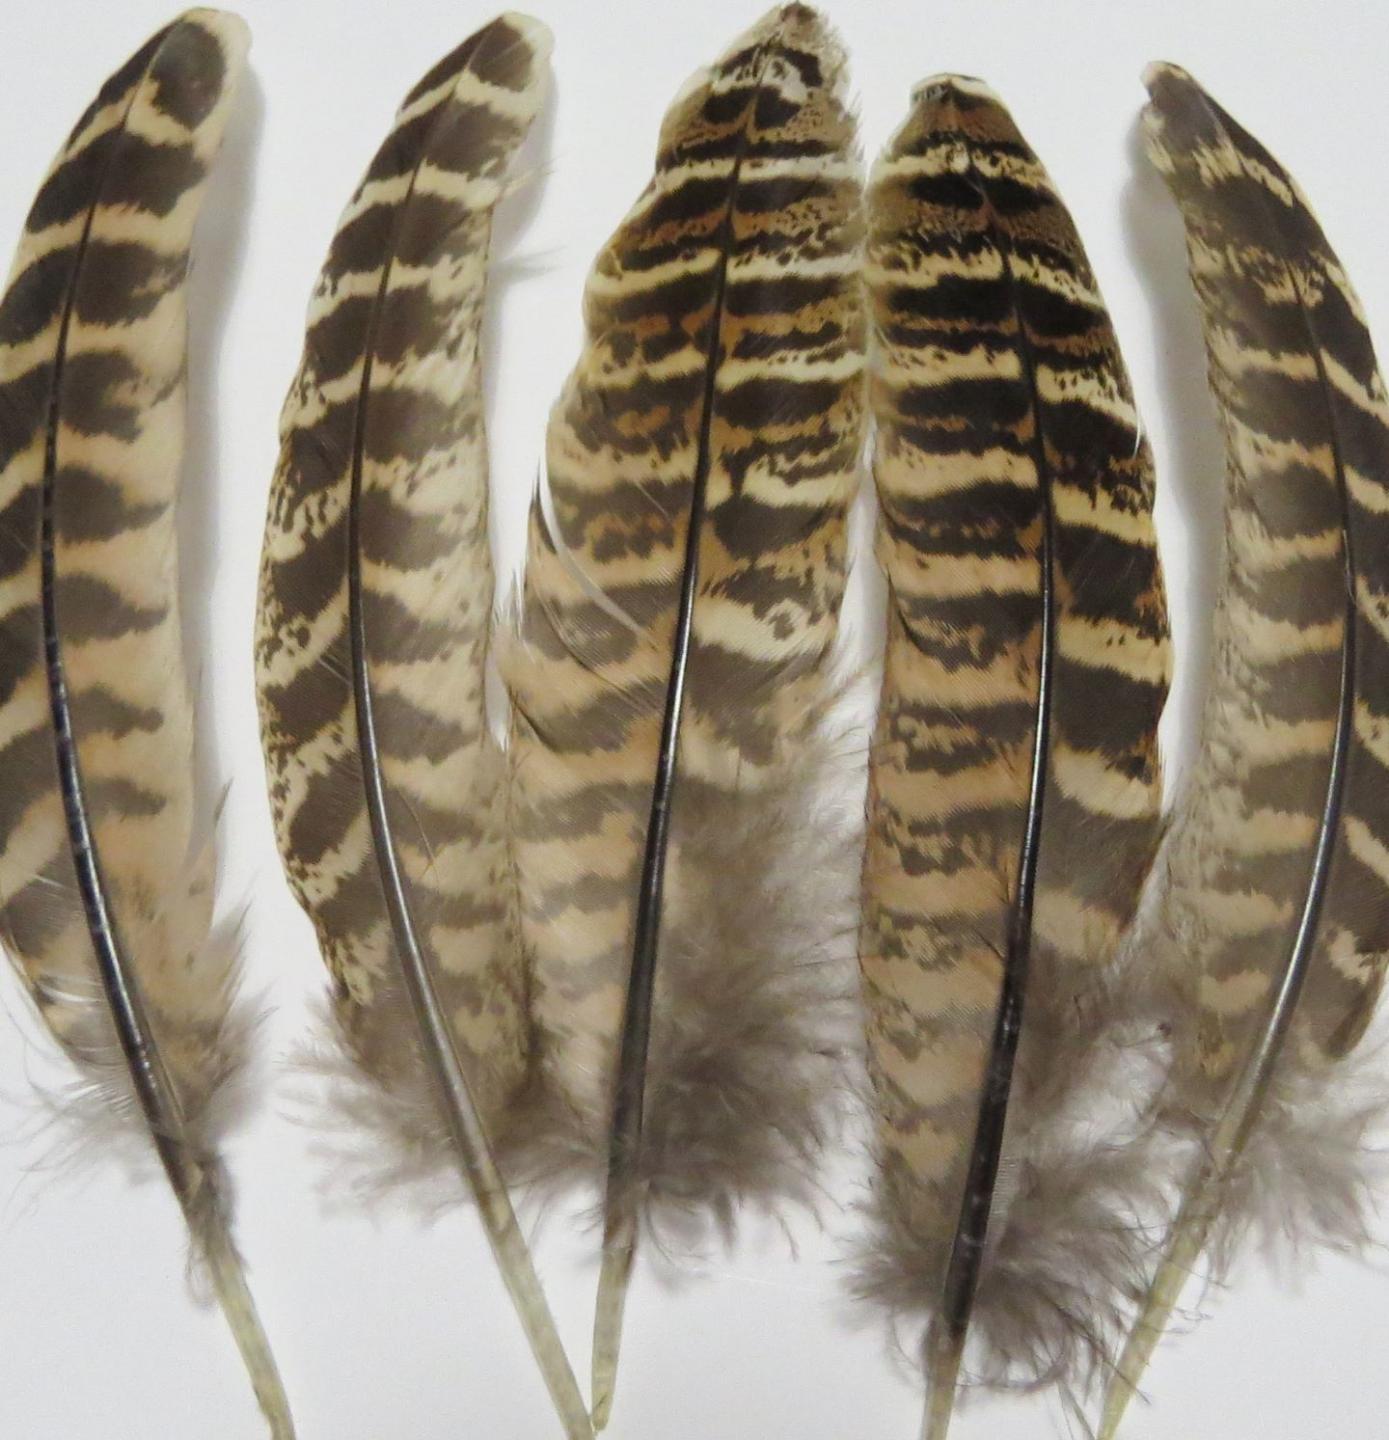 https://www.feathergirl.co.nz/sites/www.feathergirl.co.nz/files/styles/full_1440/public/product-images/pheasant-wing-quill-feathers-beige-closeup.jpg